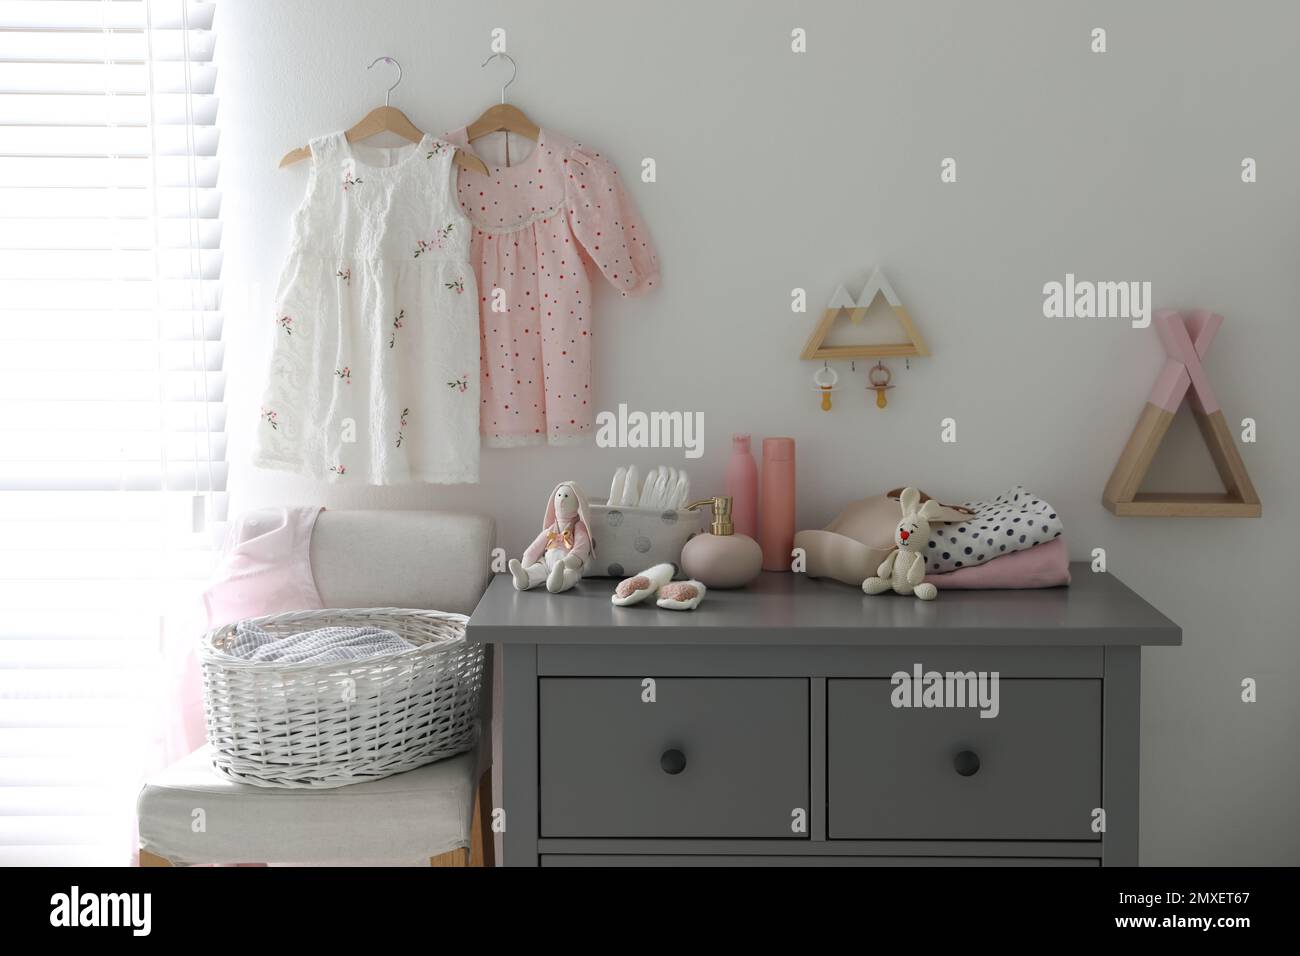 Stylish chest of drawers and accessories in child room Stock Photo